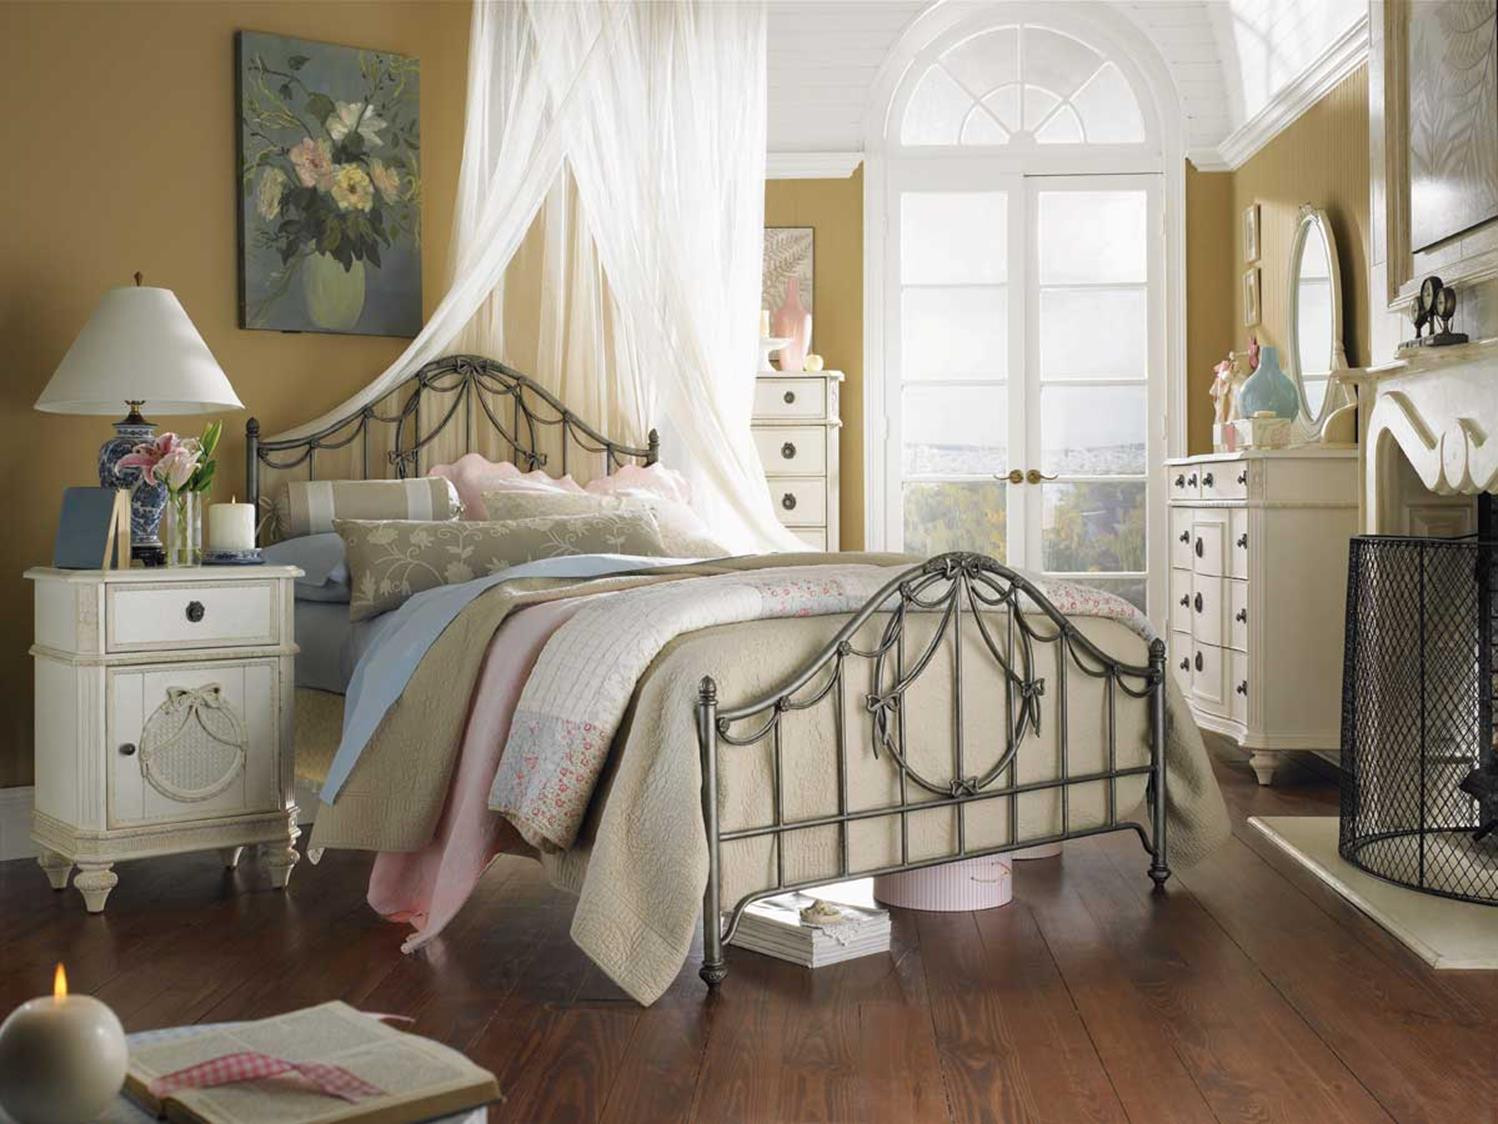 Chic Bedroom Decor
 44 Gorgeous Shabby Chic Bedroom Decorating Ideas for Women